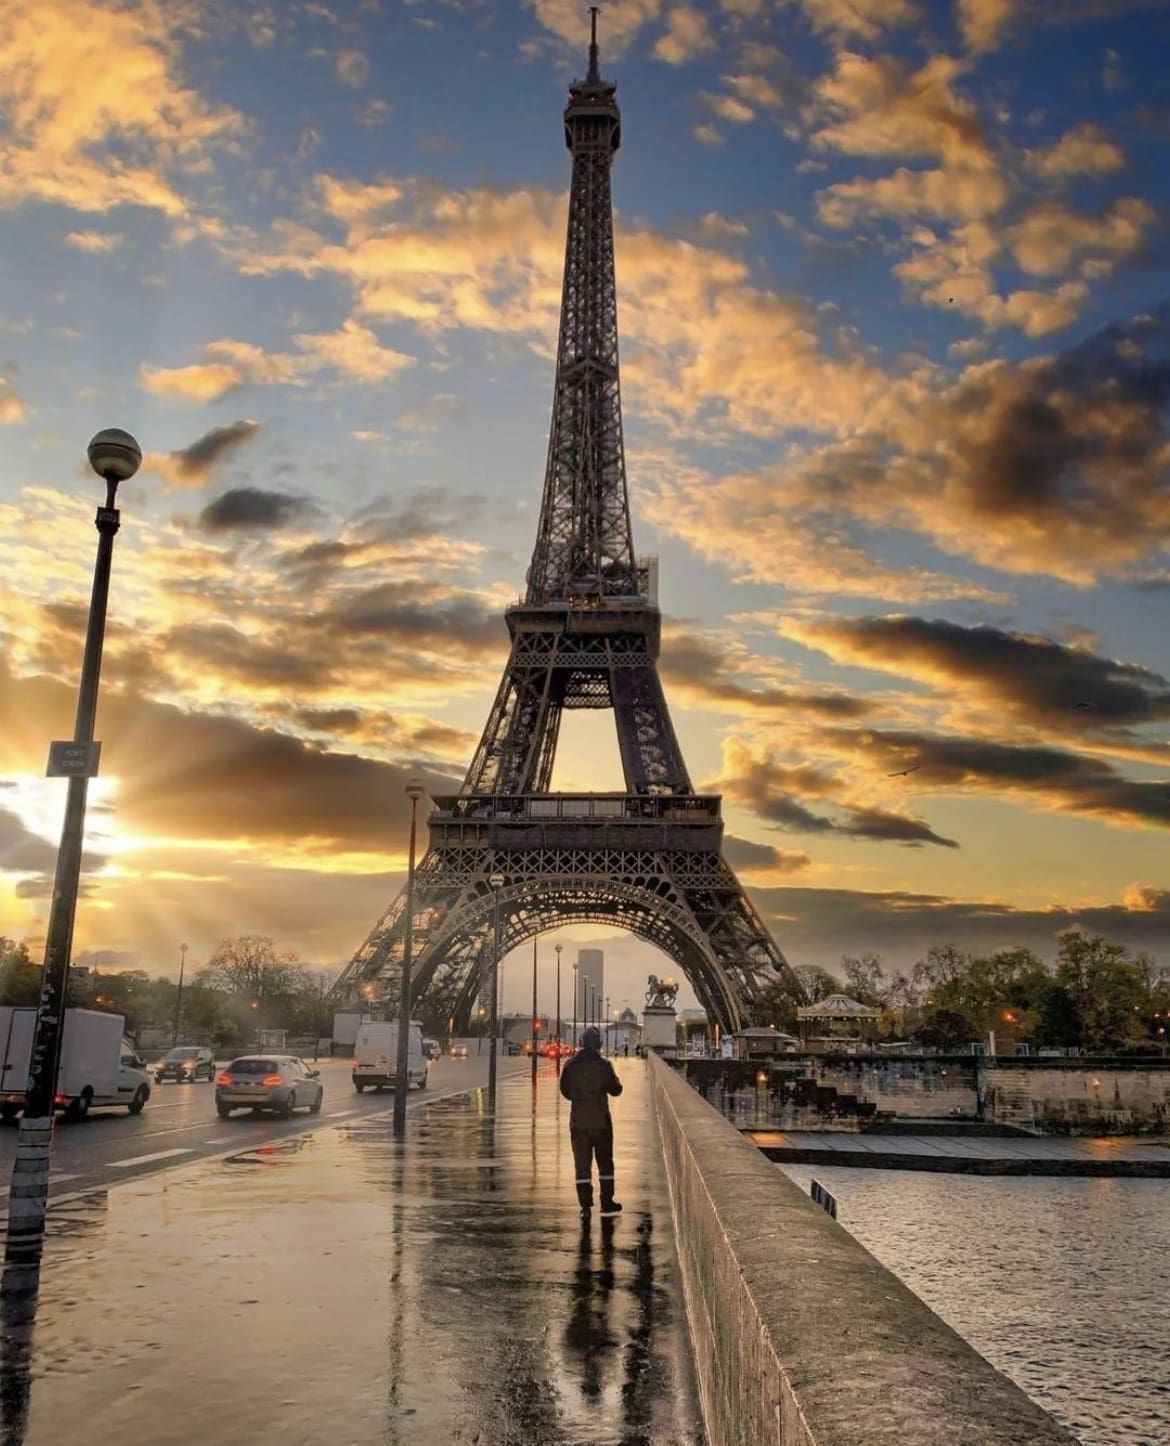 Eiffel Tower, paris - 12 Of The Best Places To Visit In France